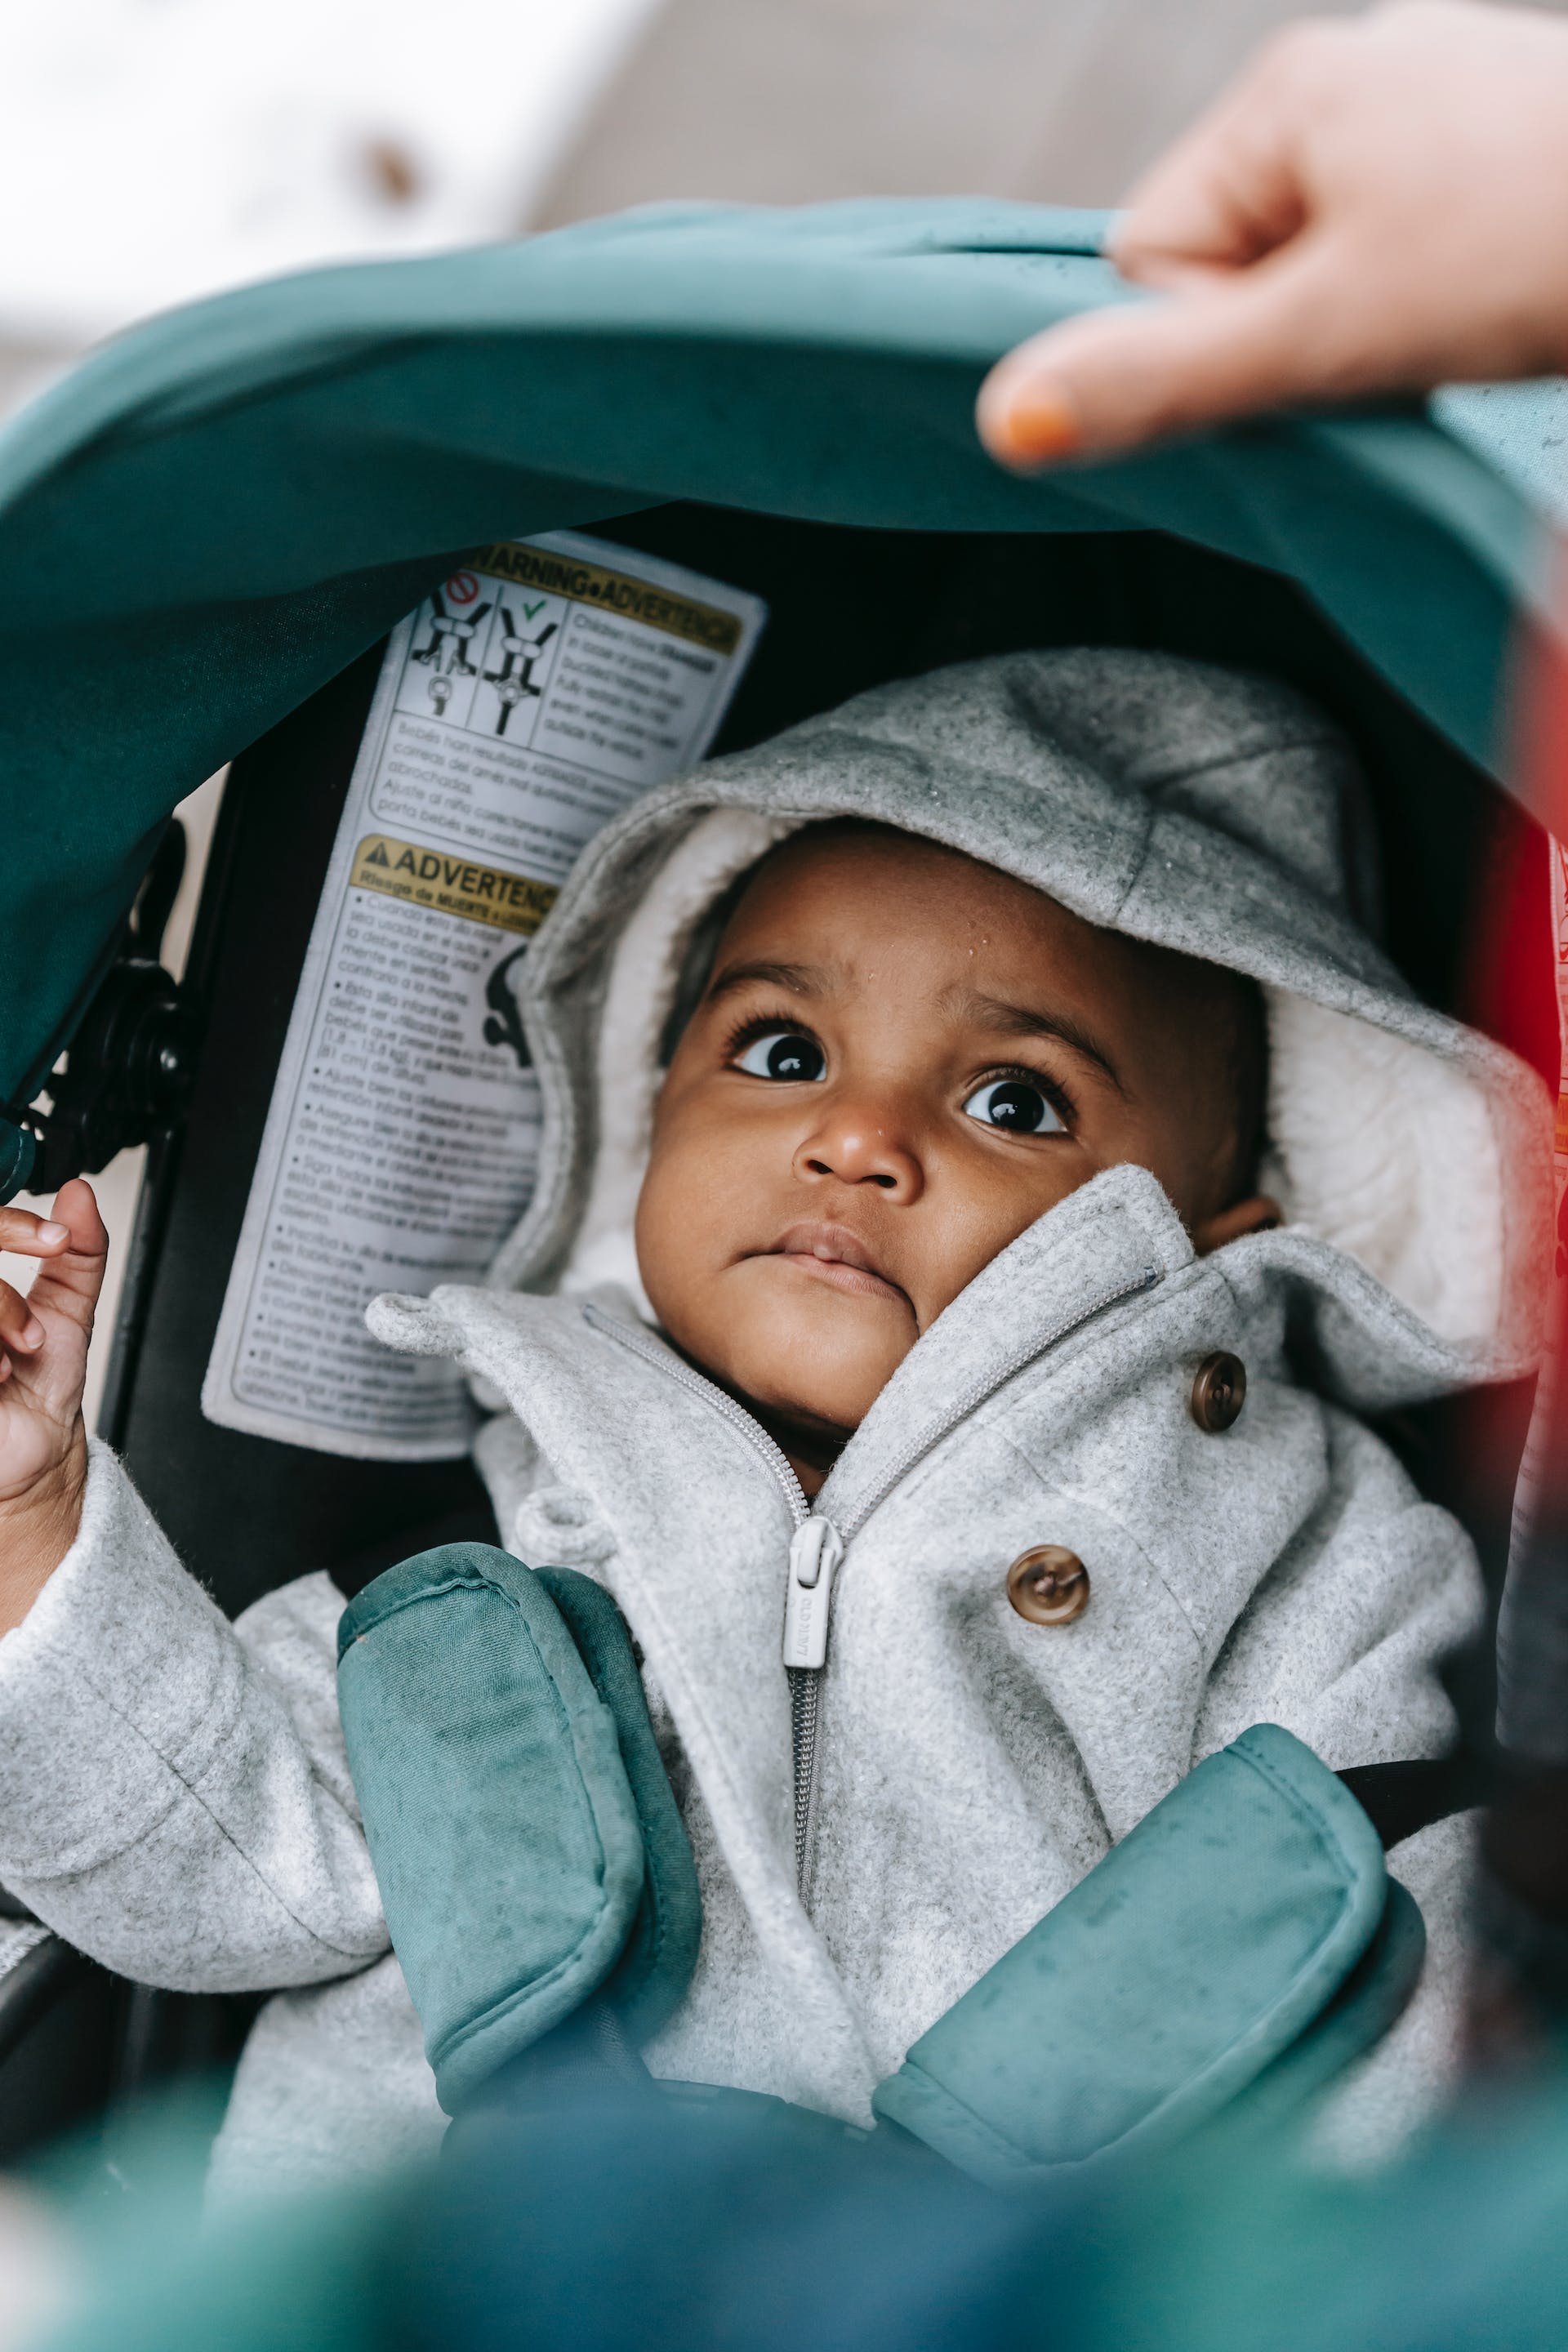 A baby in a stroller | Source: Pexels